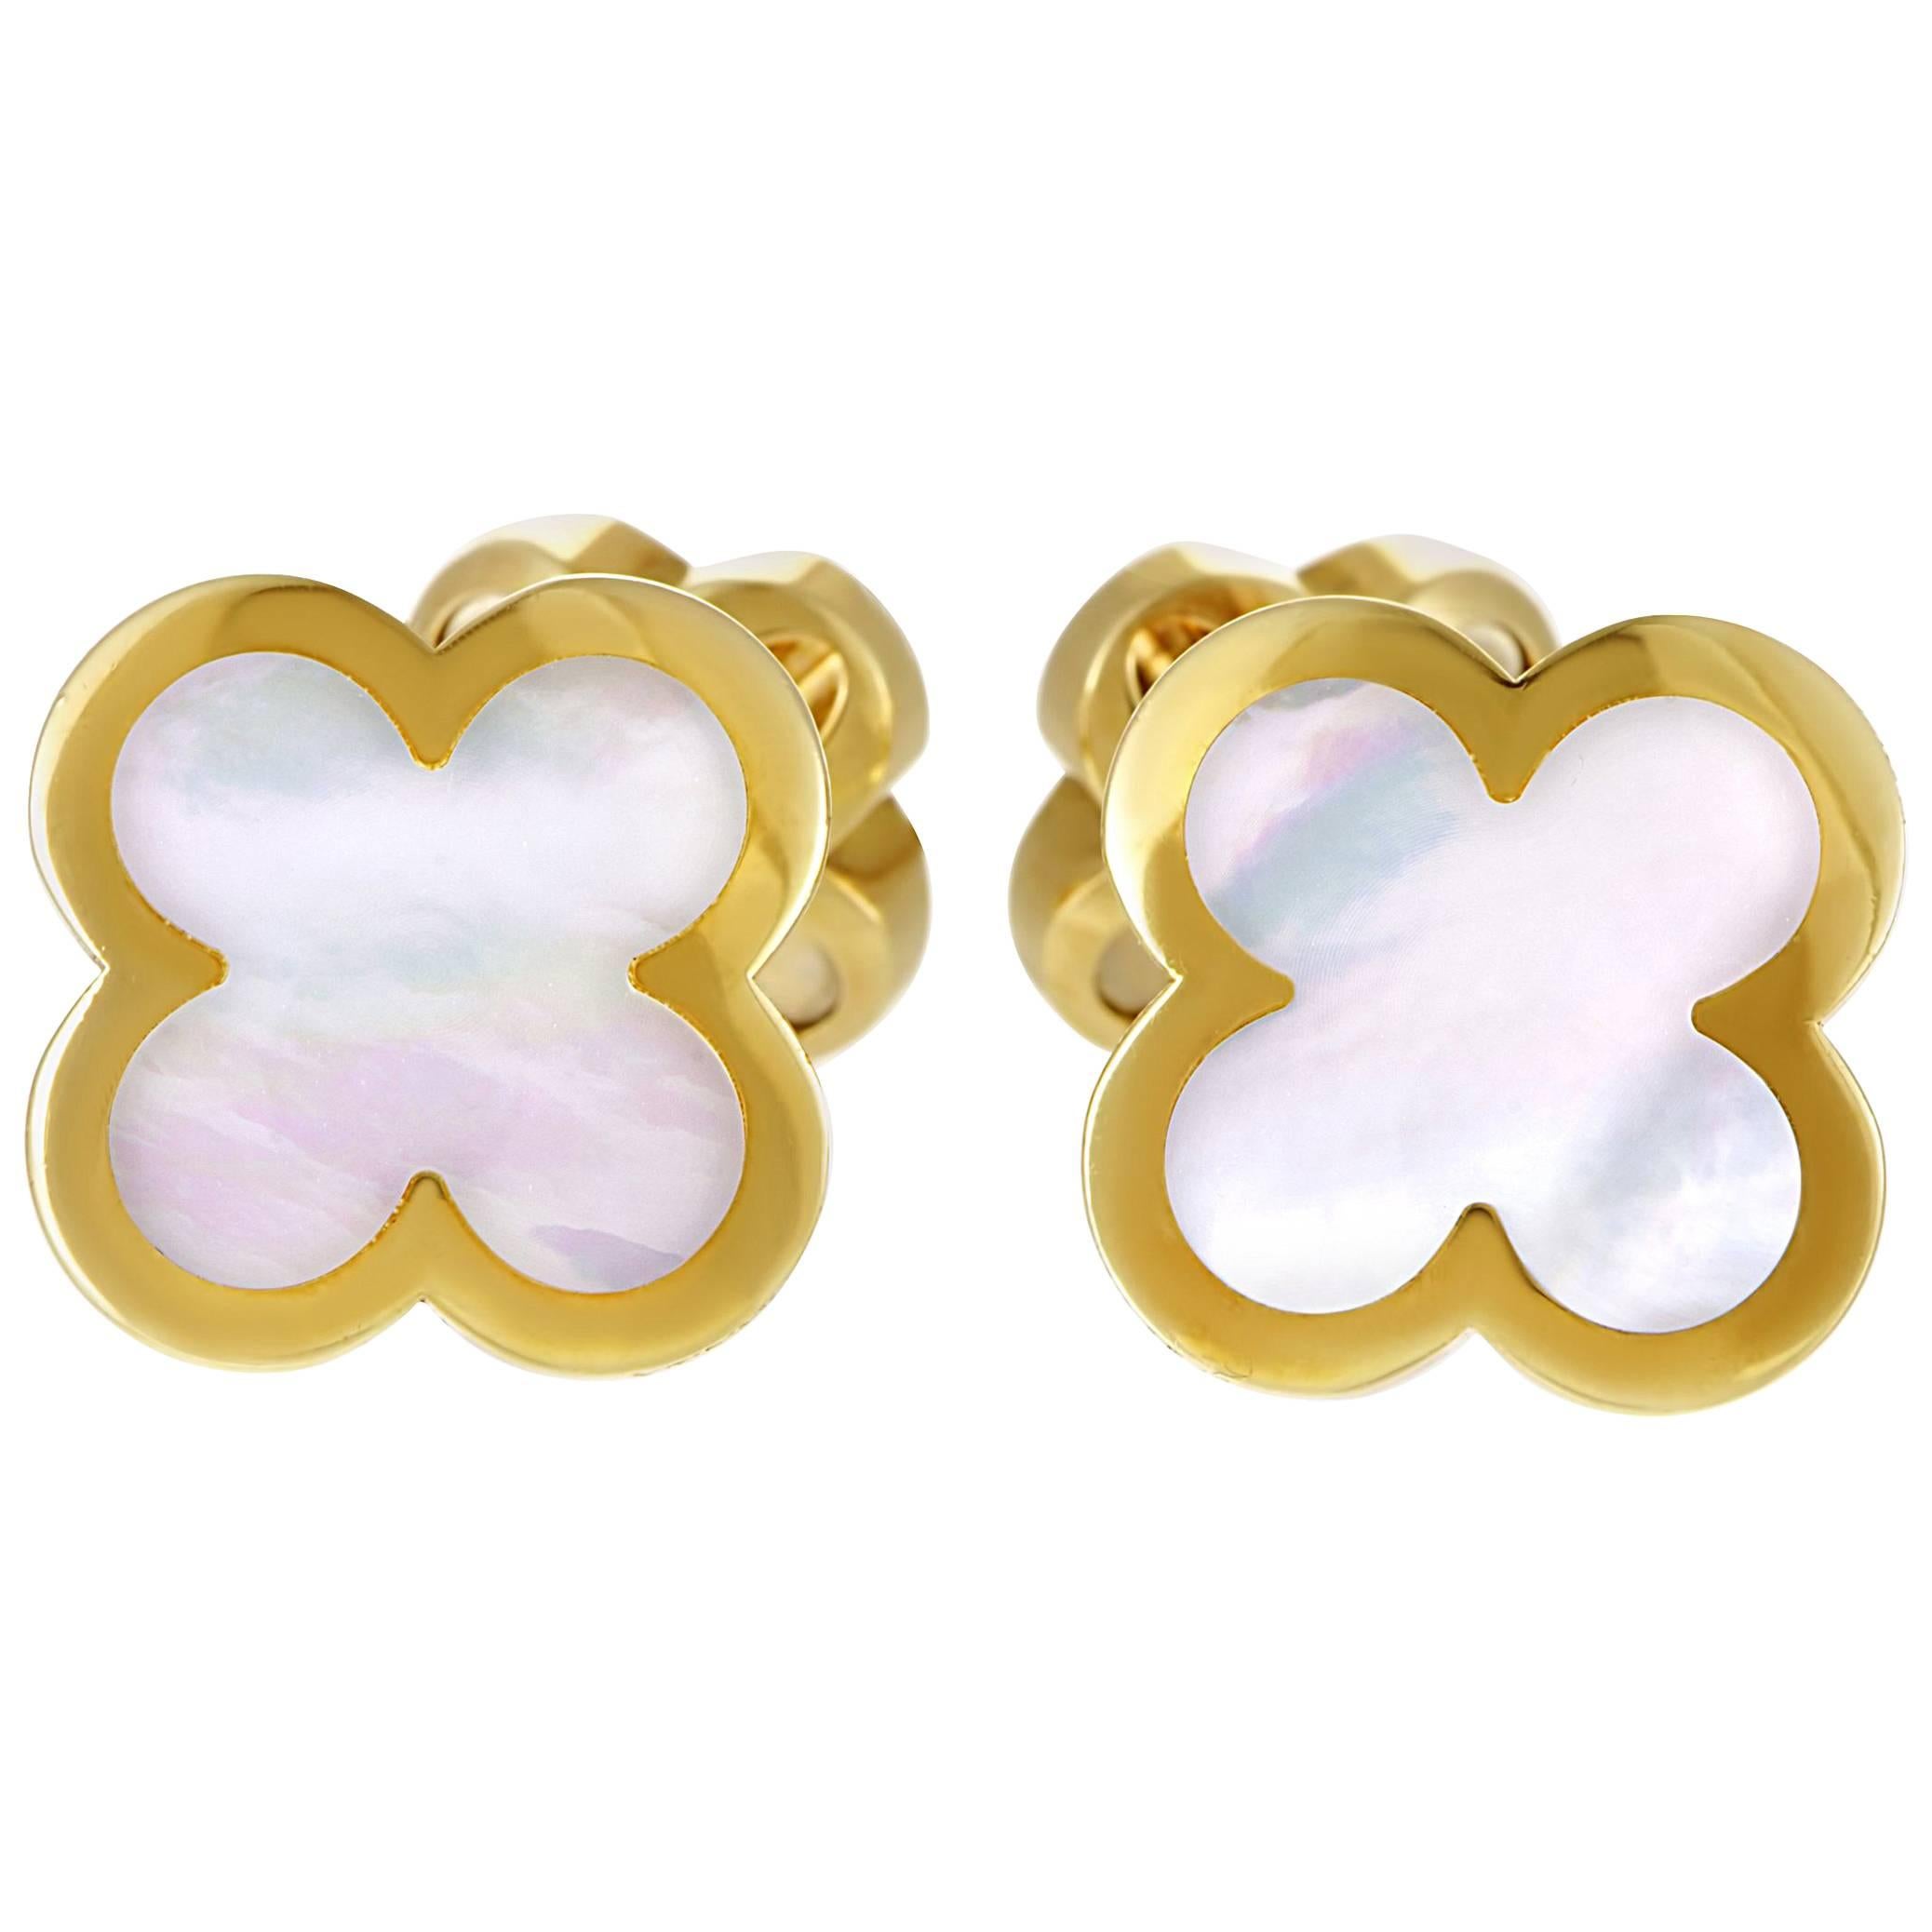 Van Cleef & Arpels Pure Alhambra Mother-of-Pearl Yellow Gold Cufflinks